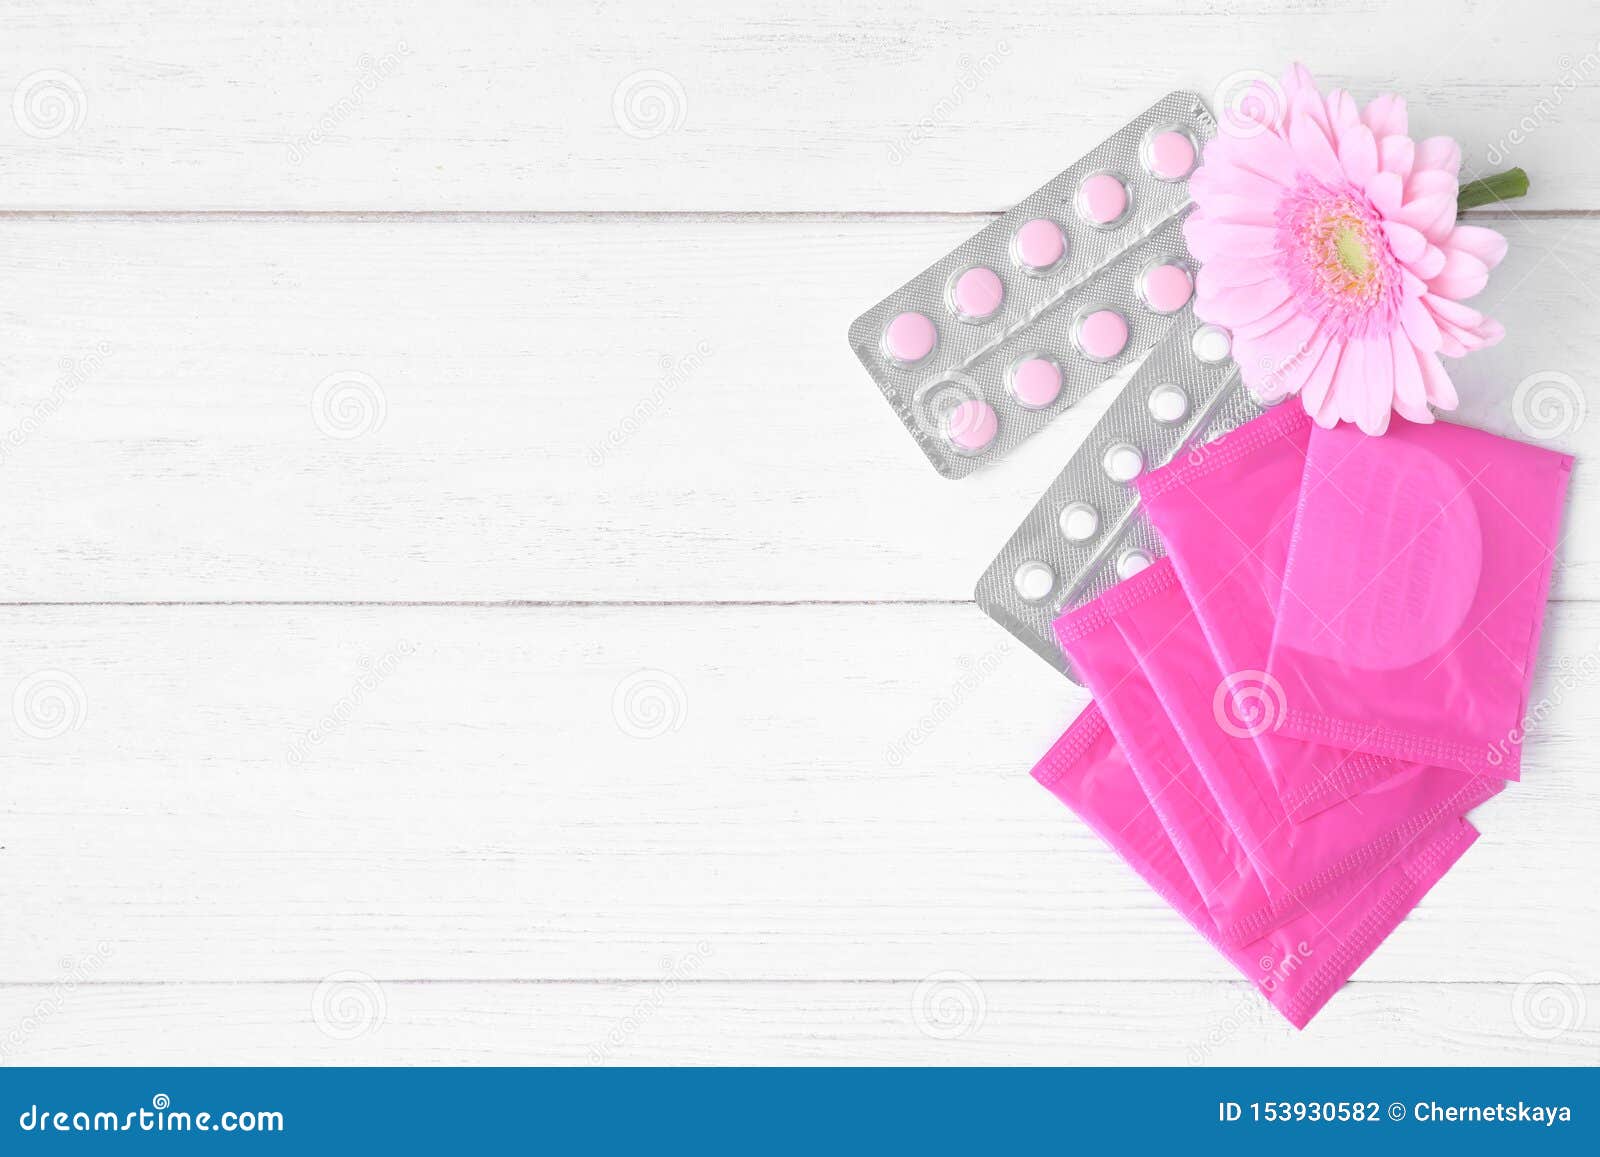 flat lay composition with menstrual pads, pills and flower on white wooden table. gynecology concept